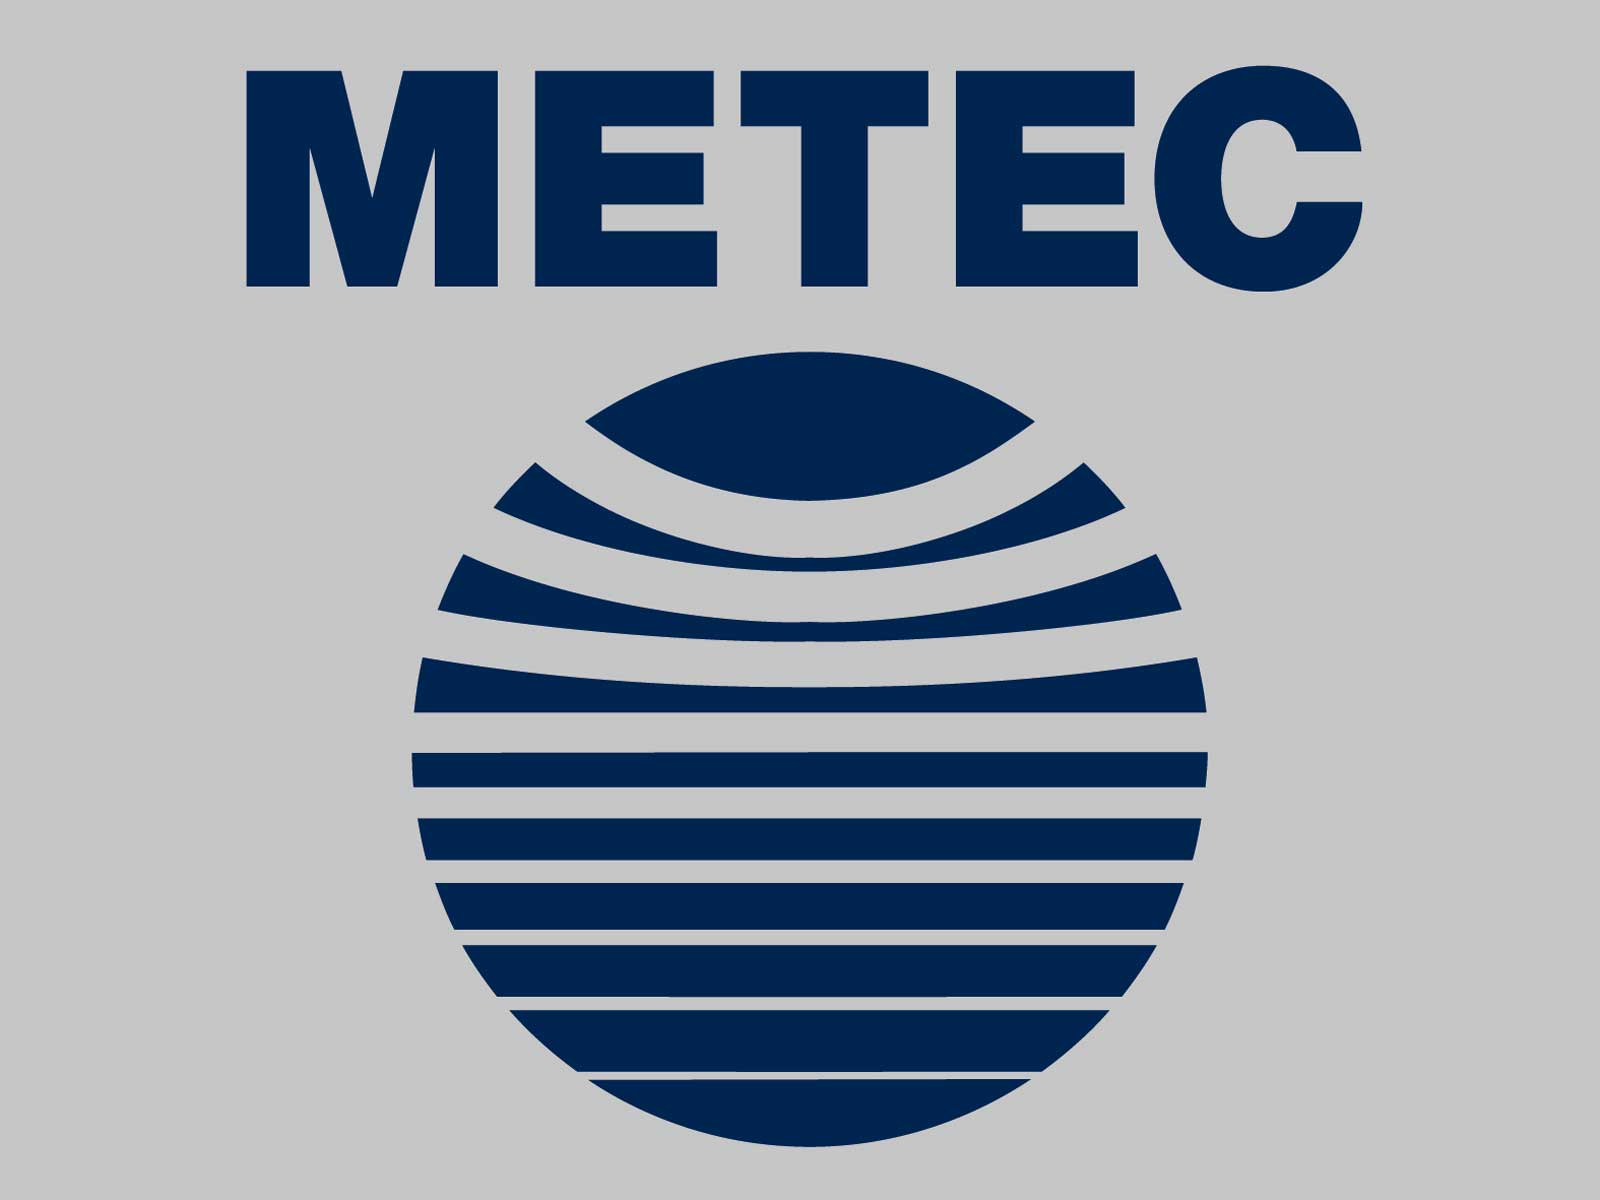 SMS group brings the future of metallurgical plant construction to life at METEC 2019 in Düsseldorf and invites visitors to exchange ideas